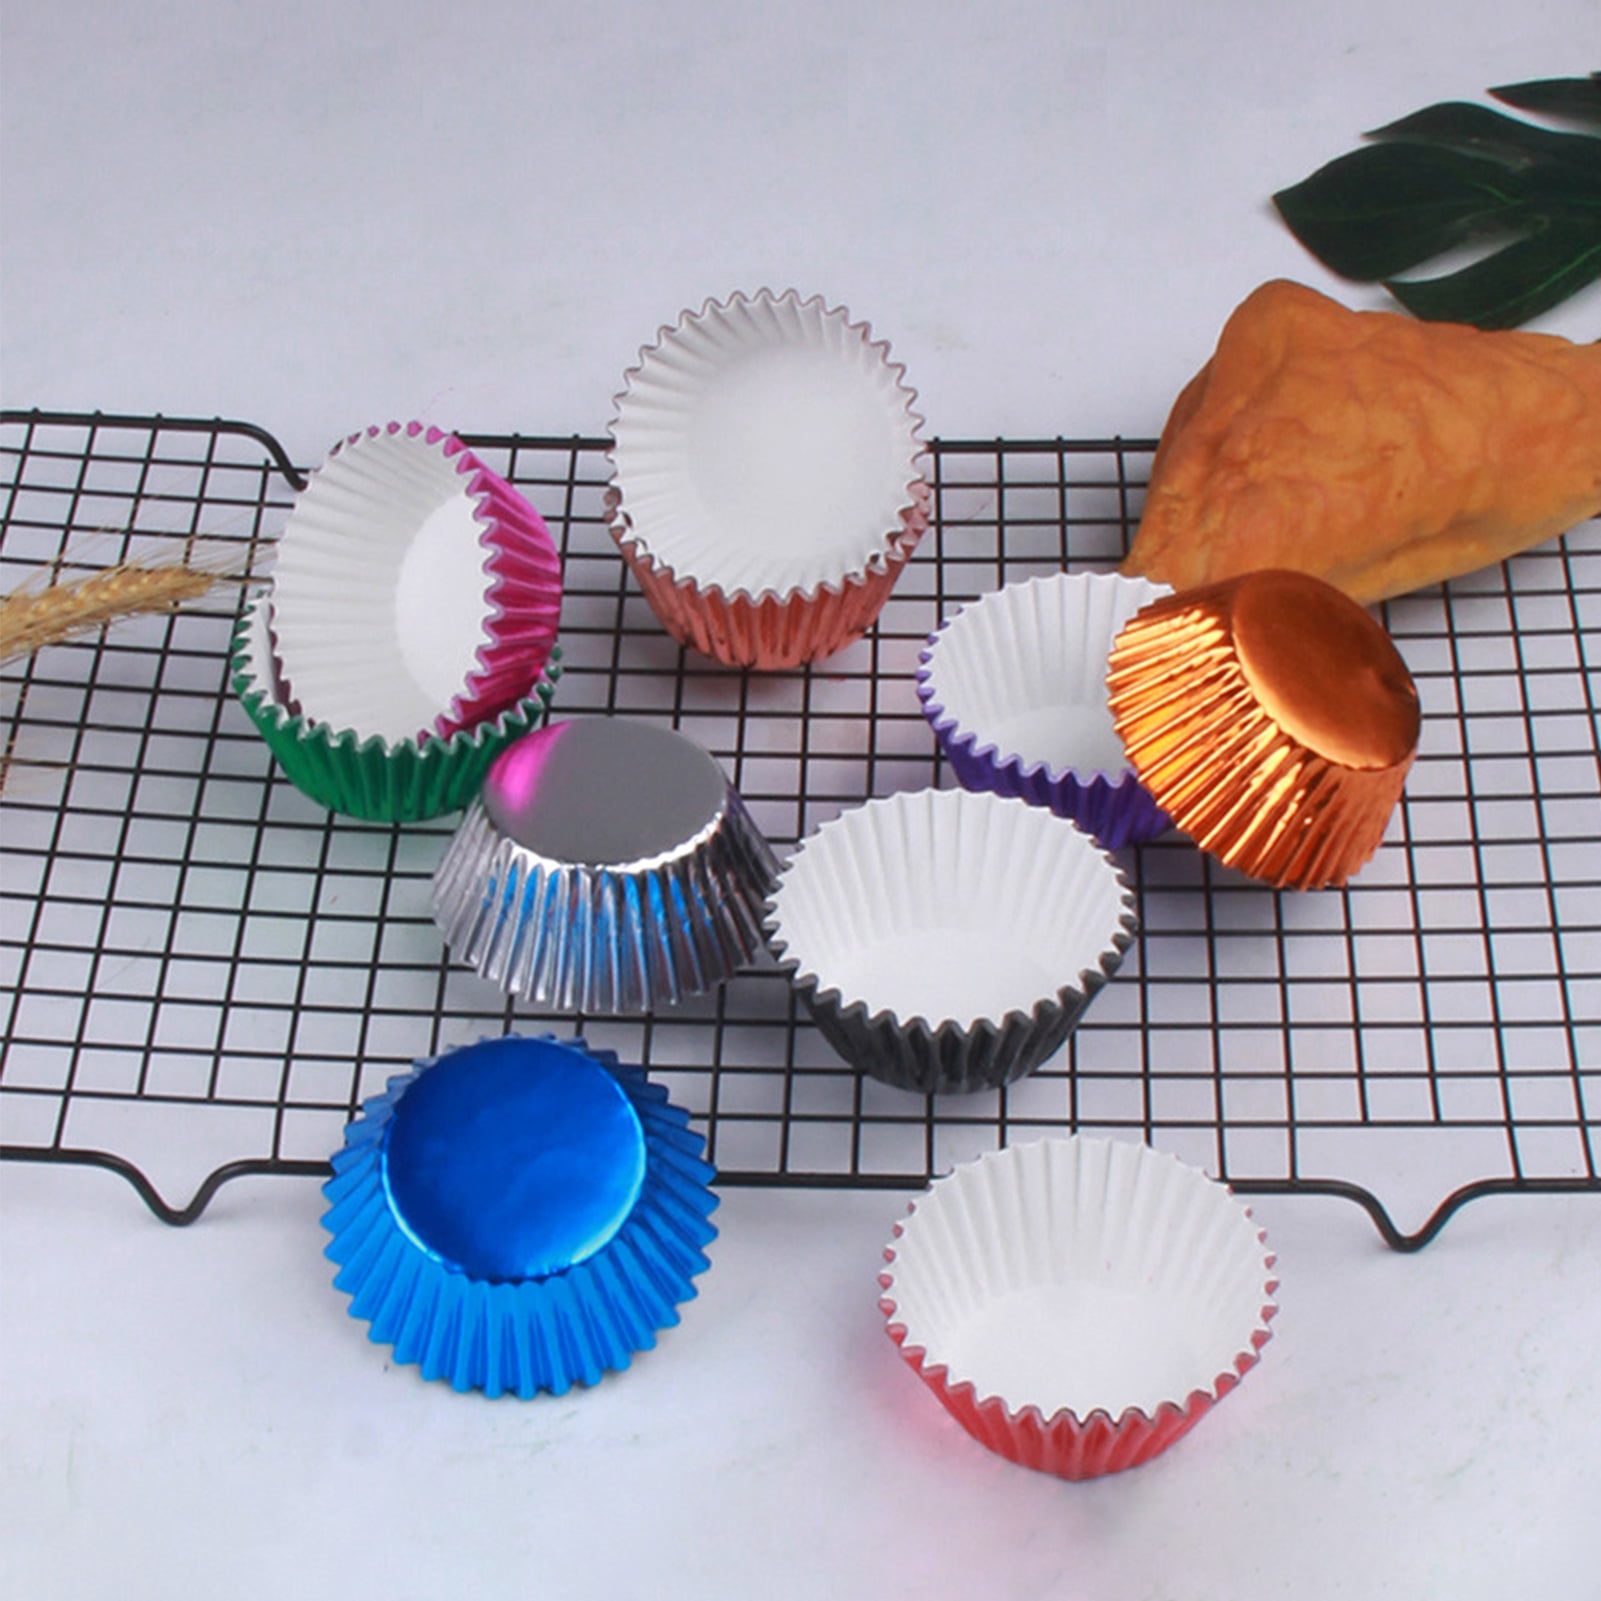 Details about   Foil Cups Liners 3.5 Ounce Baking Cups Muffin Liners Disposable Cupcake Cups 